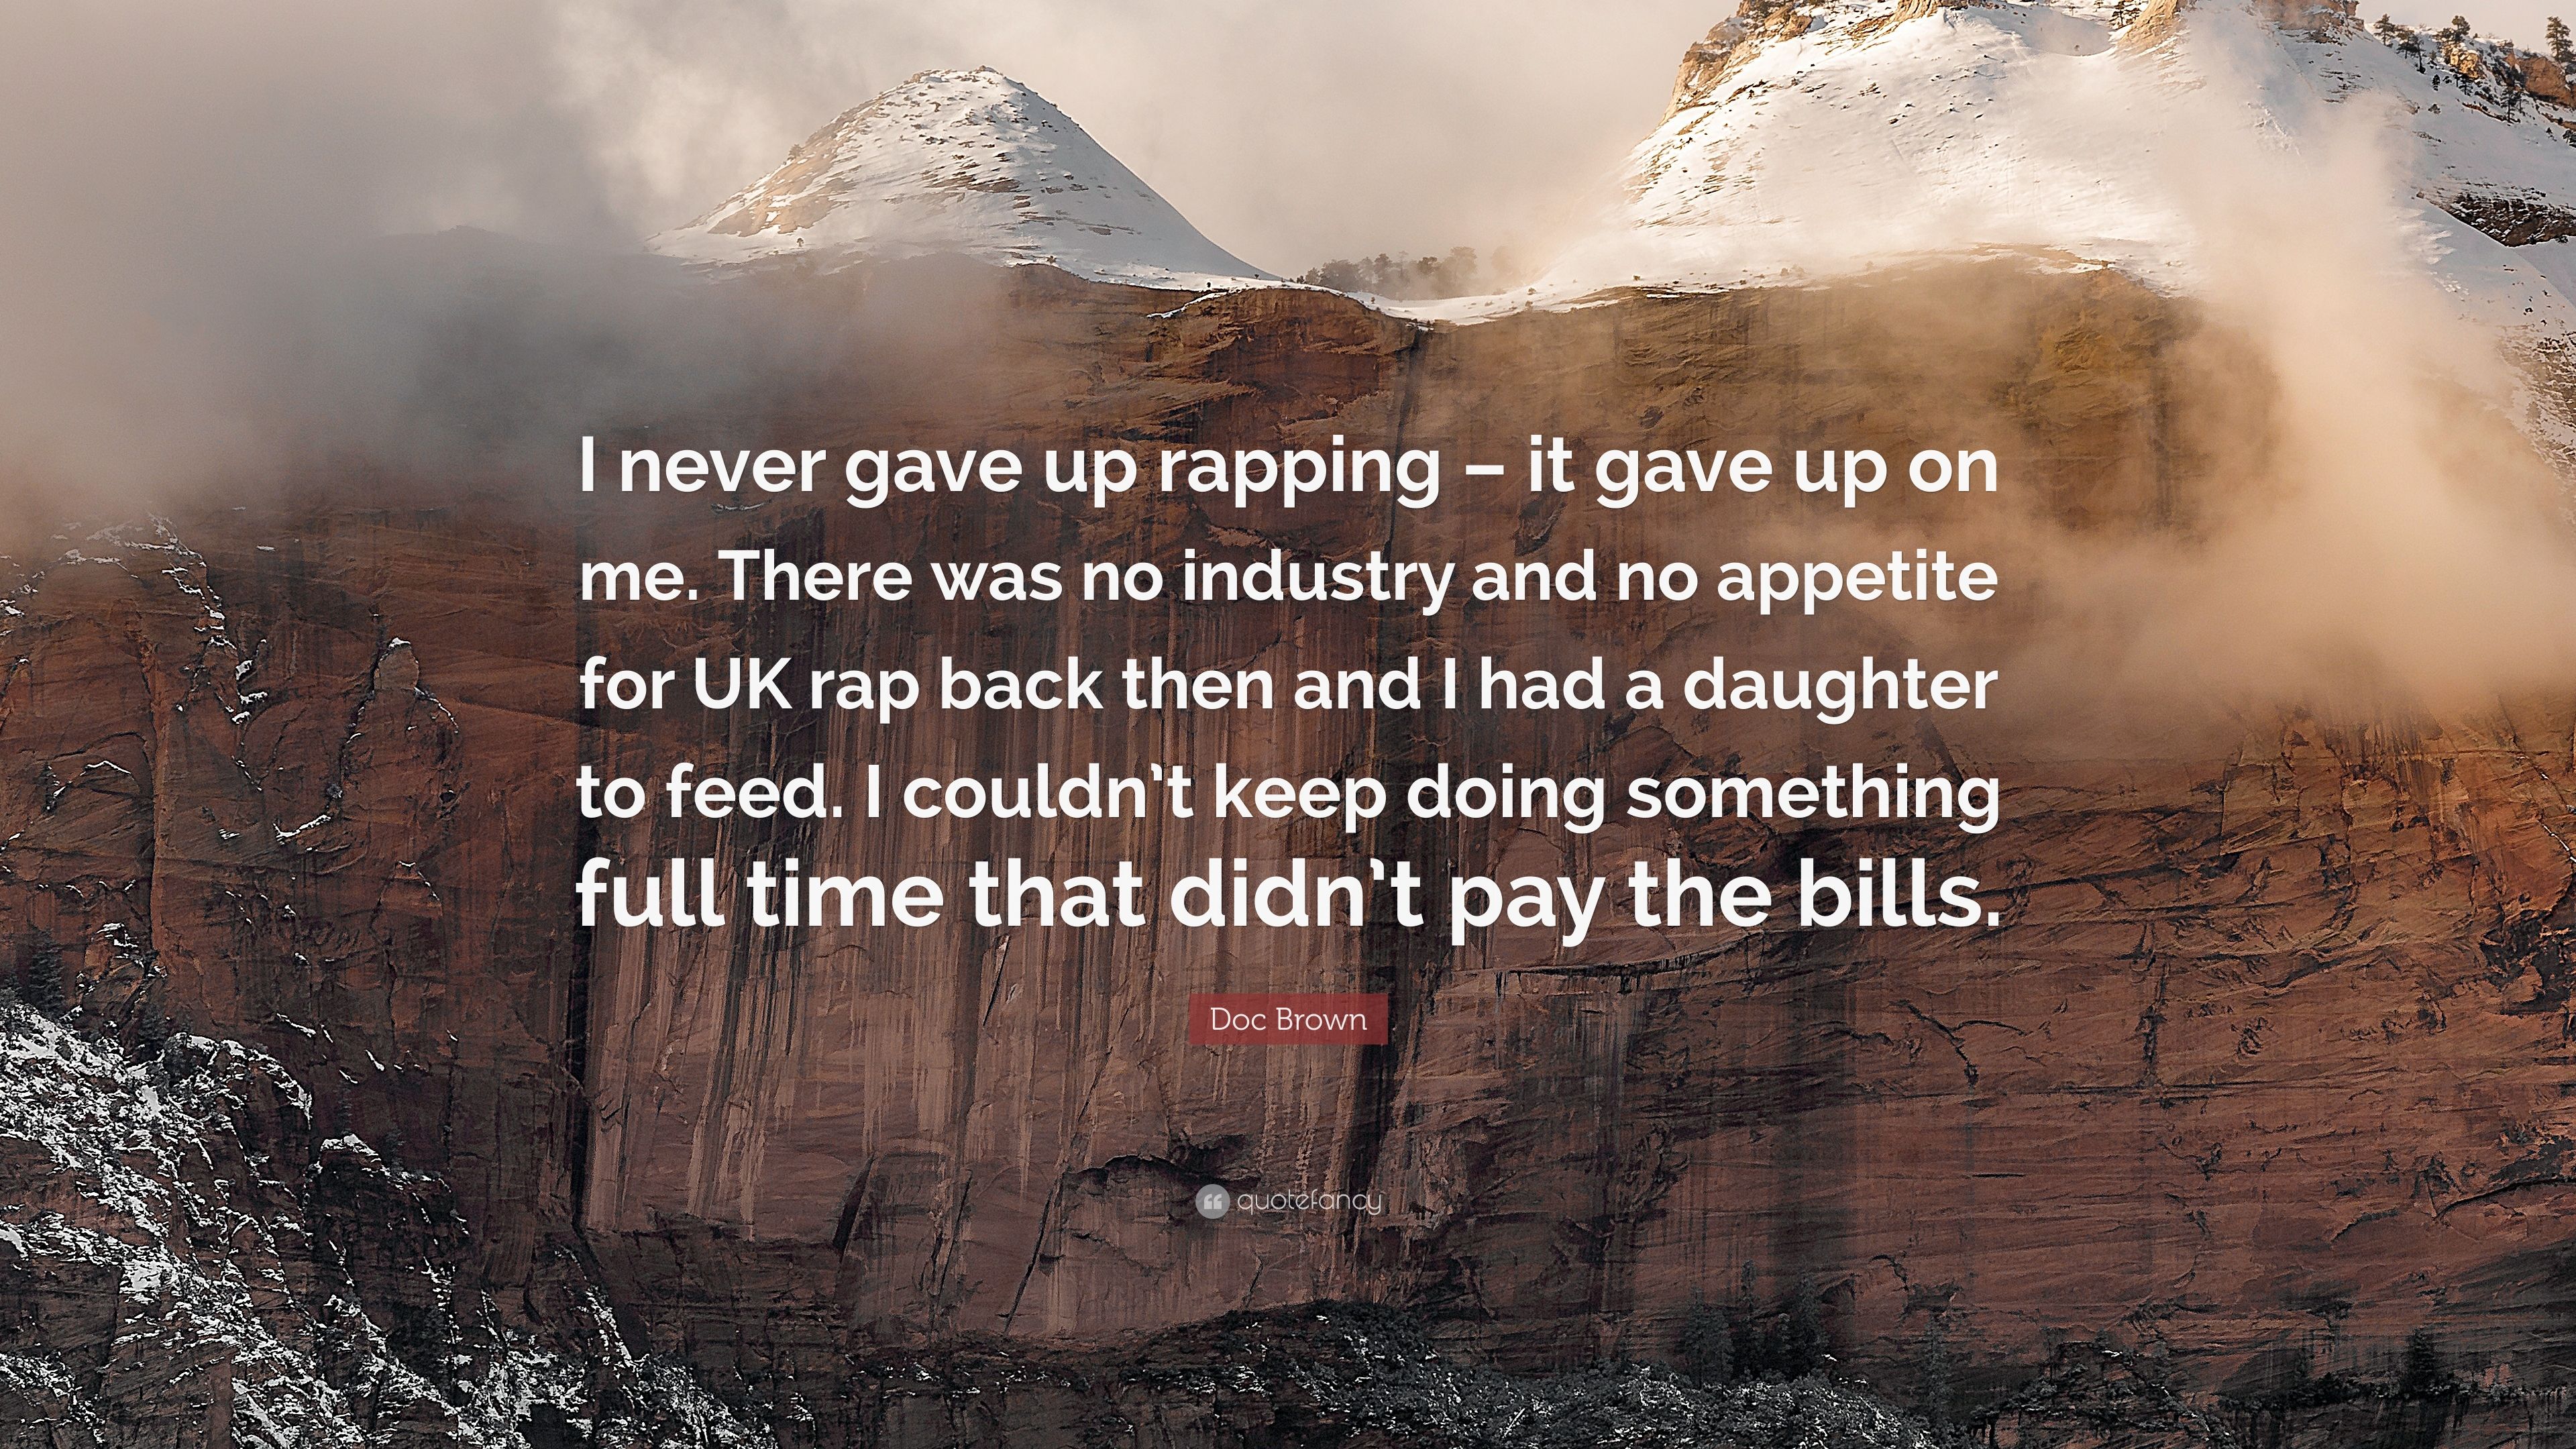 Doc Brown Quote: “I never gave up rapping